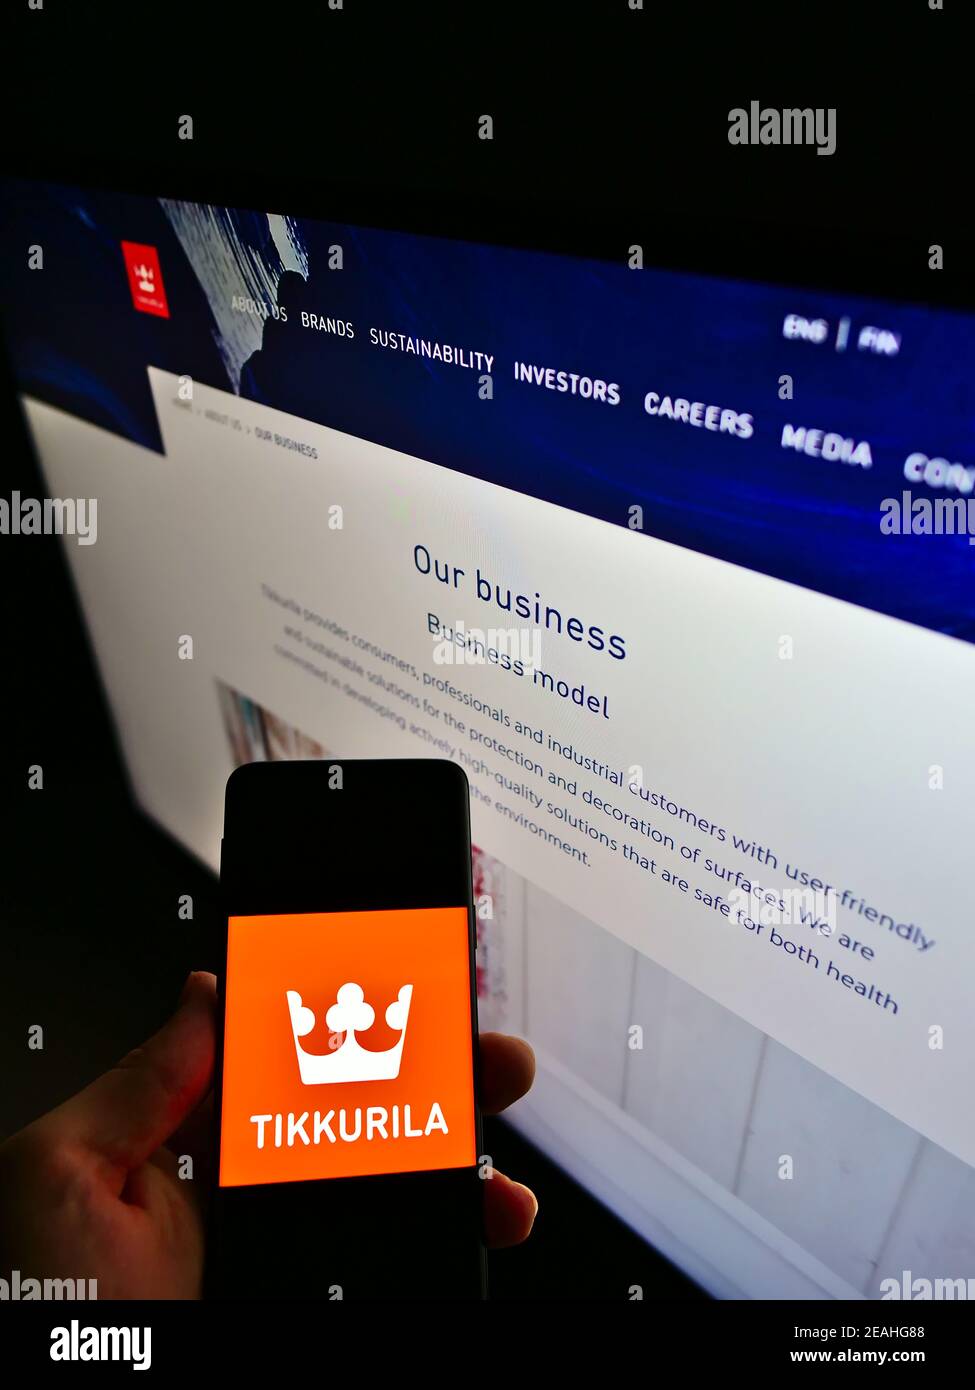 Person holding mobile phone with logo of Finnish paint manufacturer Tikkurila Oyj on screen in front of company web page. Focus on phone display. Stock Photo